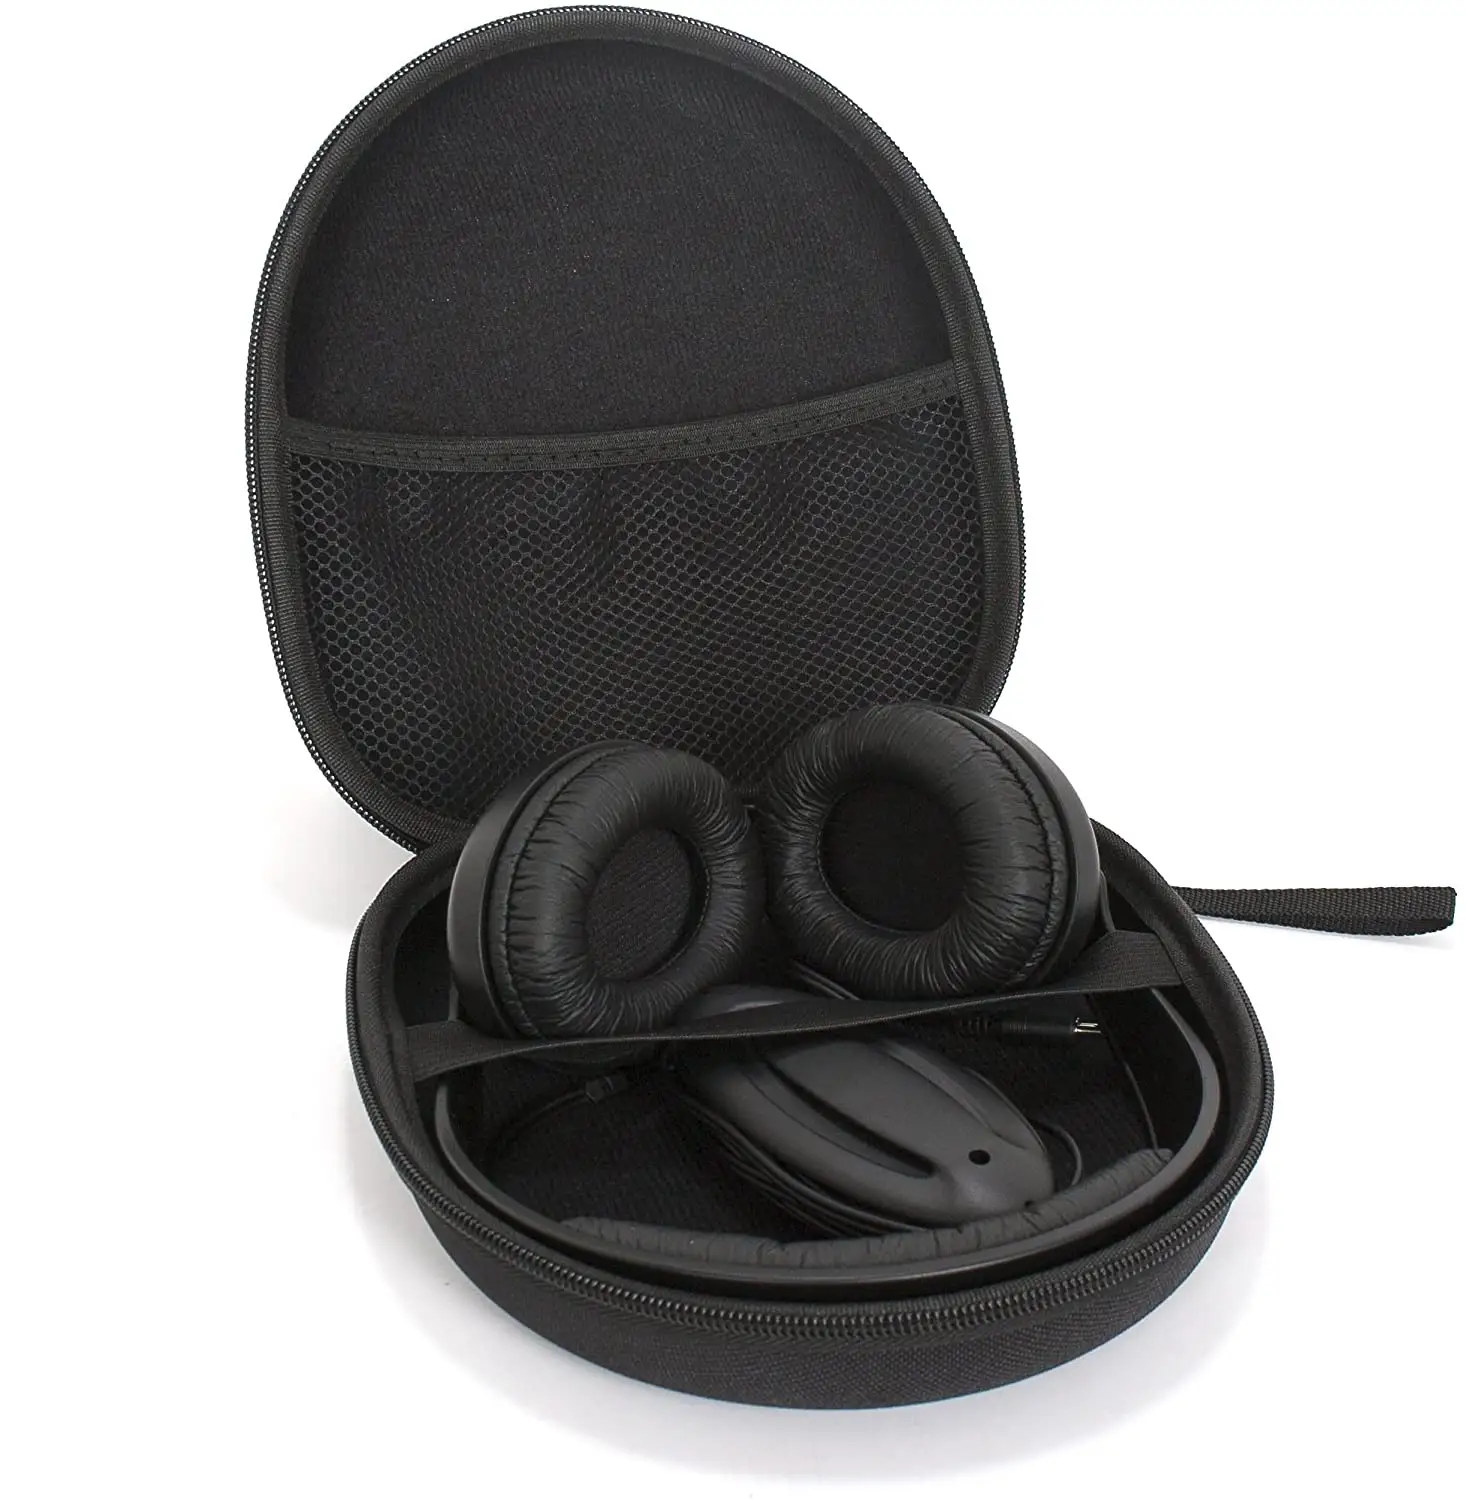 Portable leather hard shell carrying wireless zippered eva headphone headset travel organizer case bag for Sony MDR-ZX100 ZX110